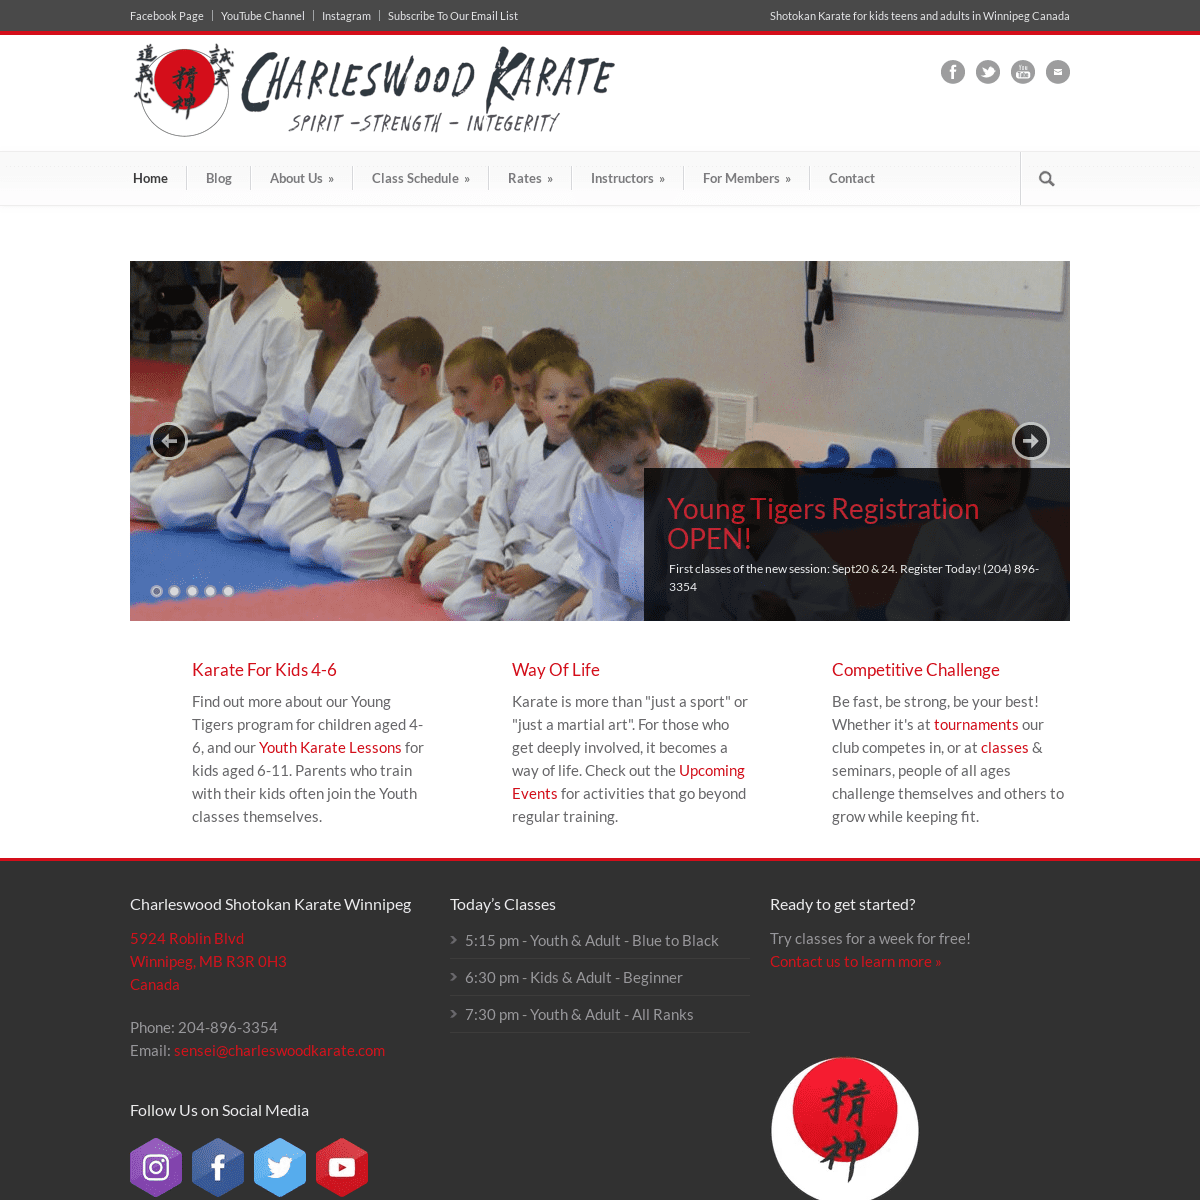 A complete backup of charleswoodkarate.com